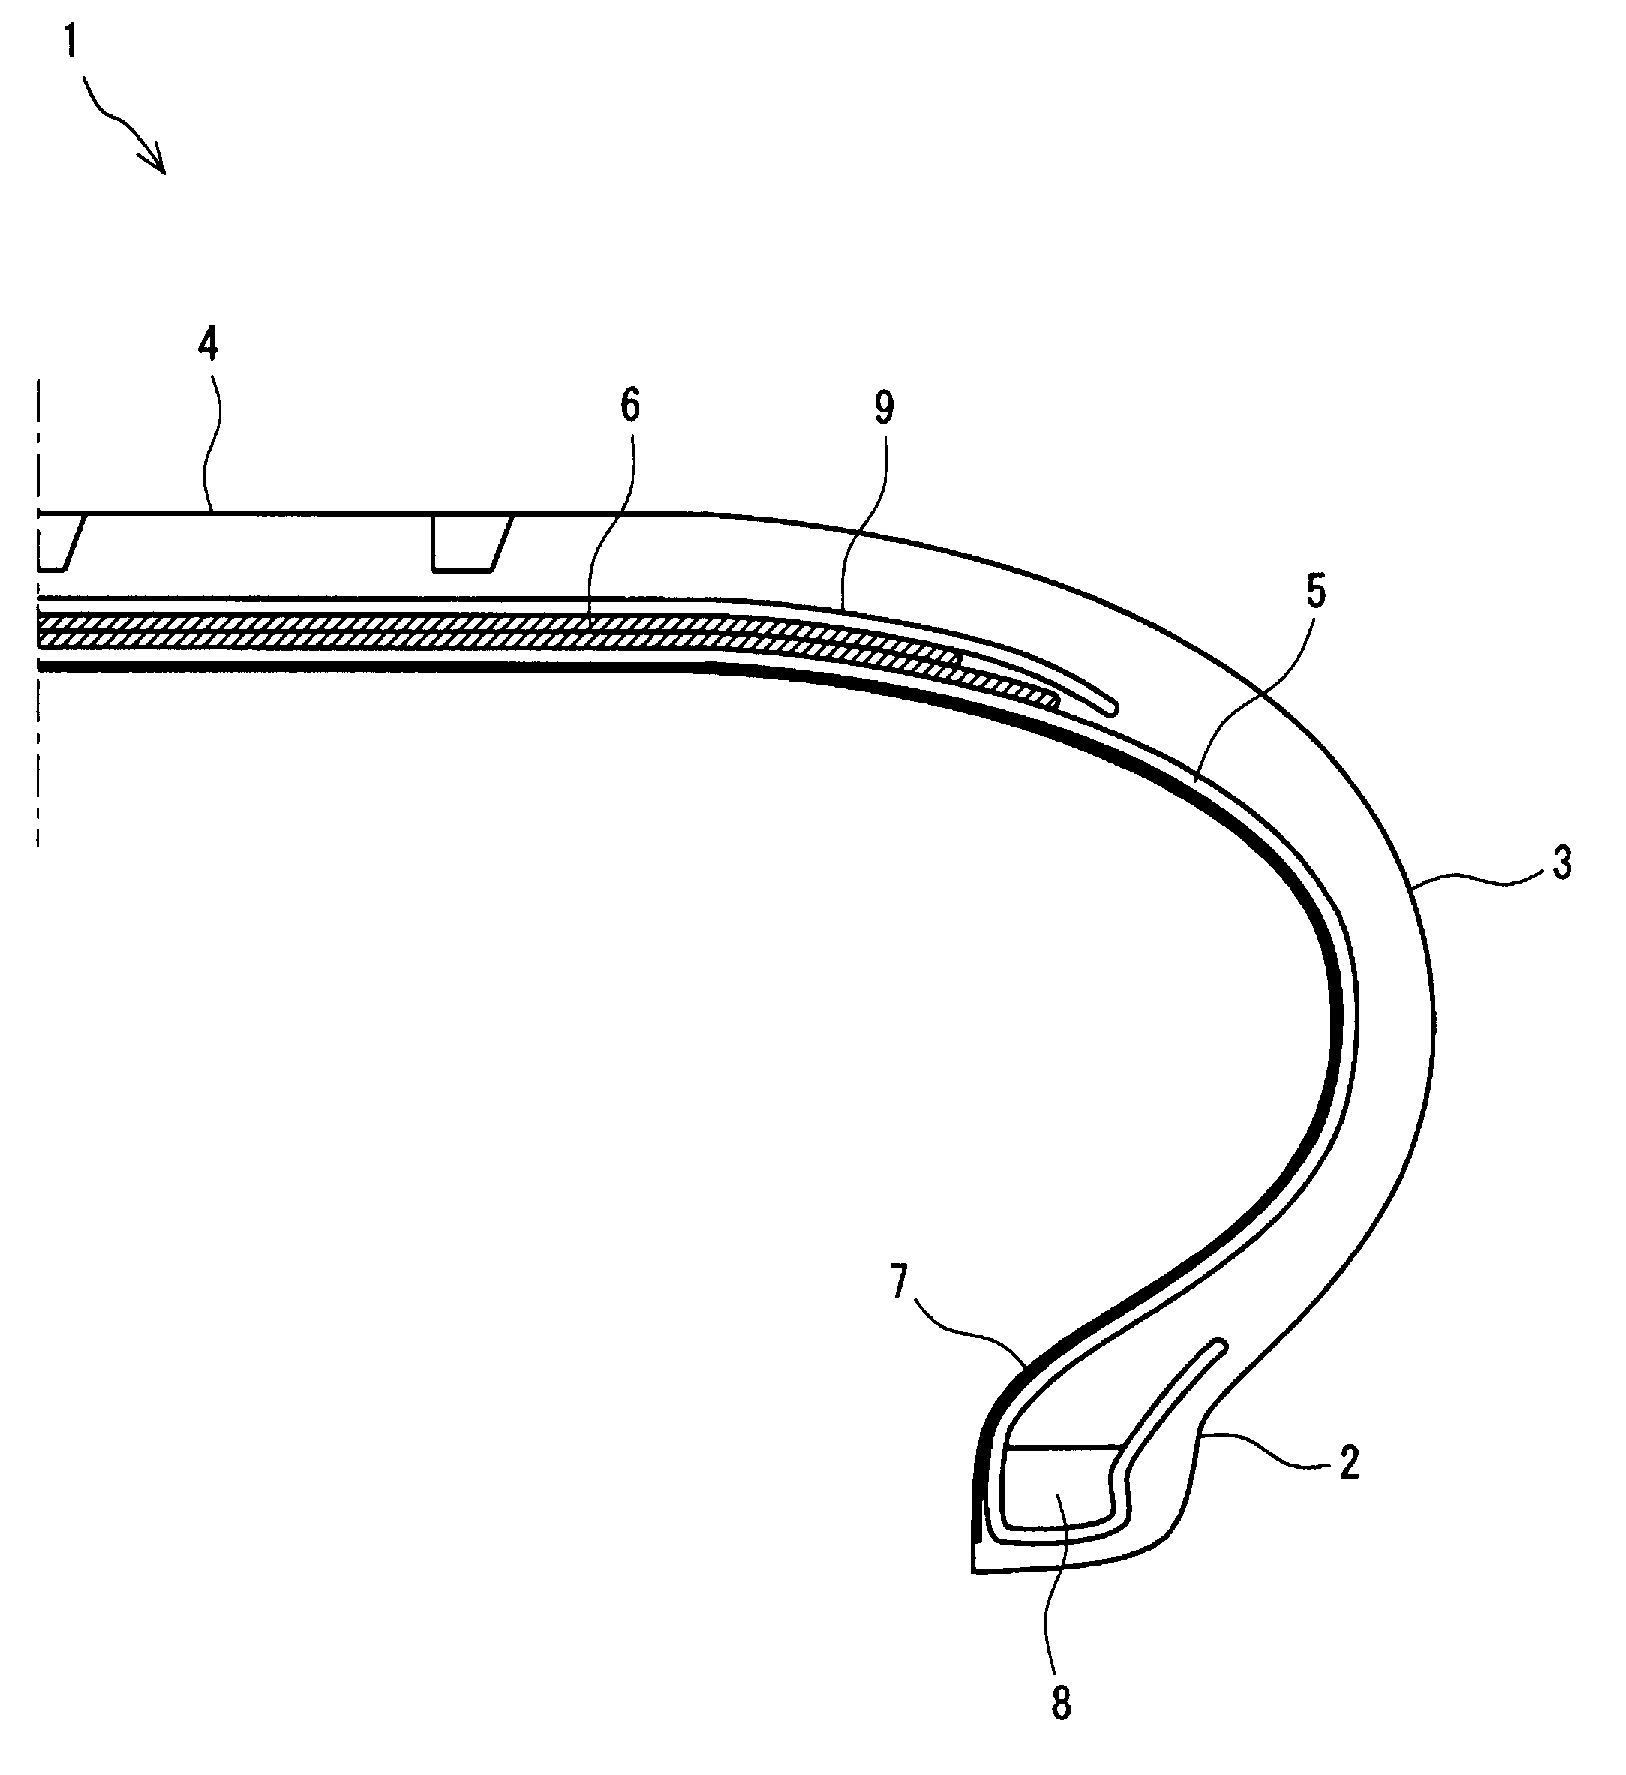 Inner liner for pneumatic tires, method for producing same, and pneumatic tire